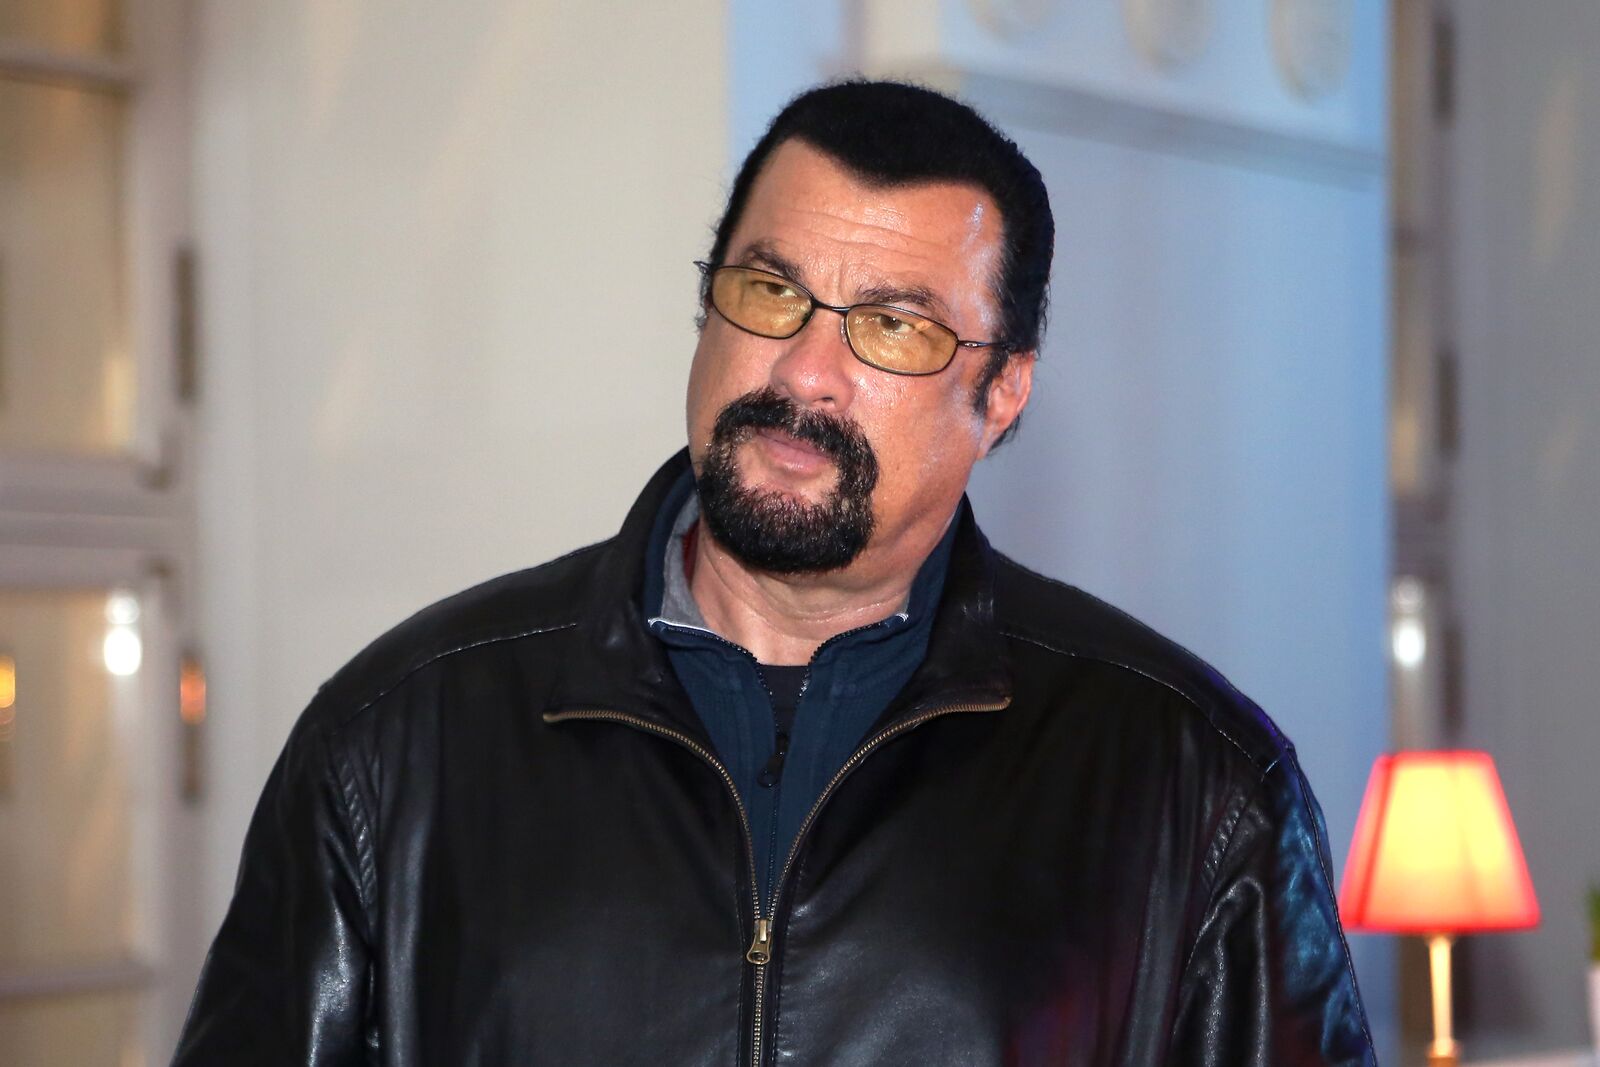 Actor Steven Seagal attends the Mercedes-Benz Fashion Week Russia S/S 2014 on October 28, 2013 in Moscow, Russia | Photo: Getty Images